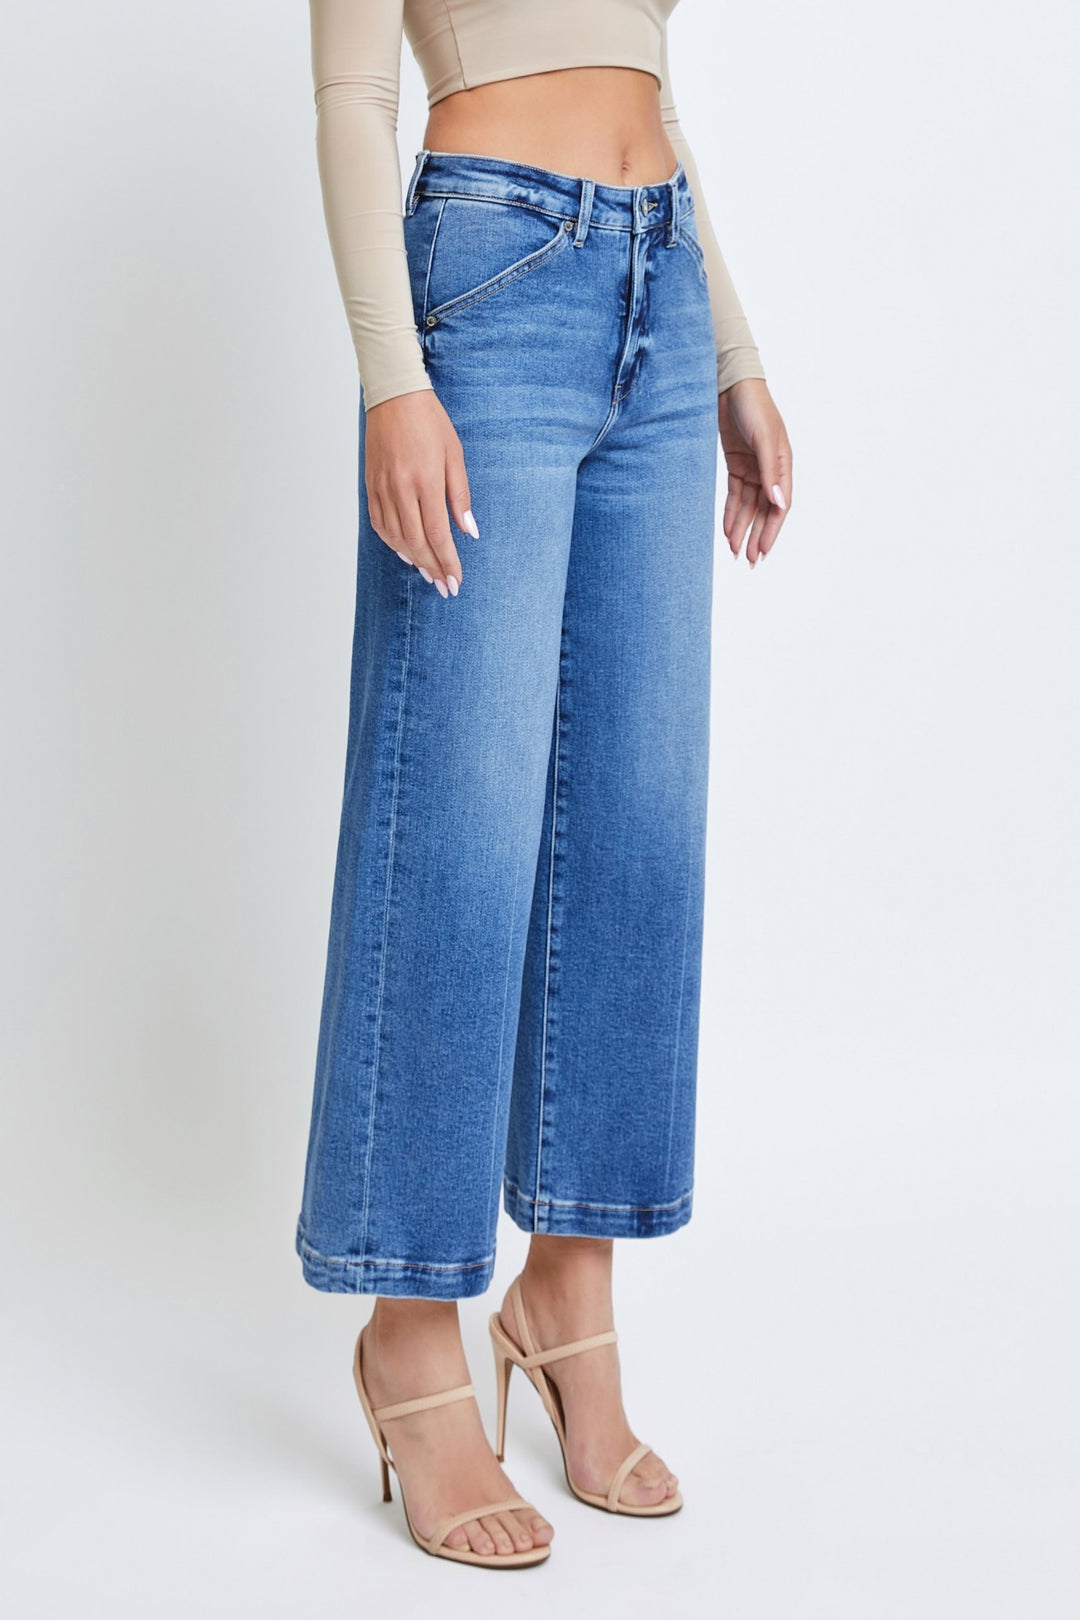 The Talk To Me Dark Clean Cropped Wide Leg Trouser